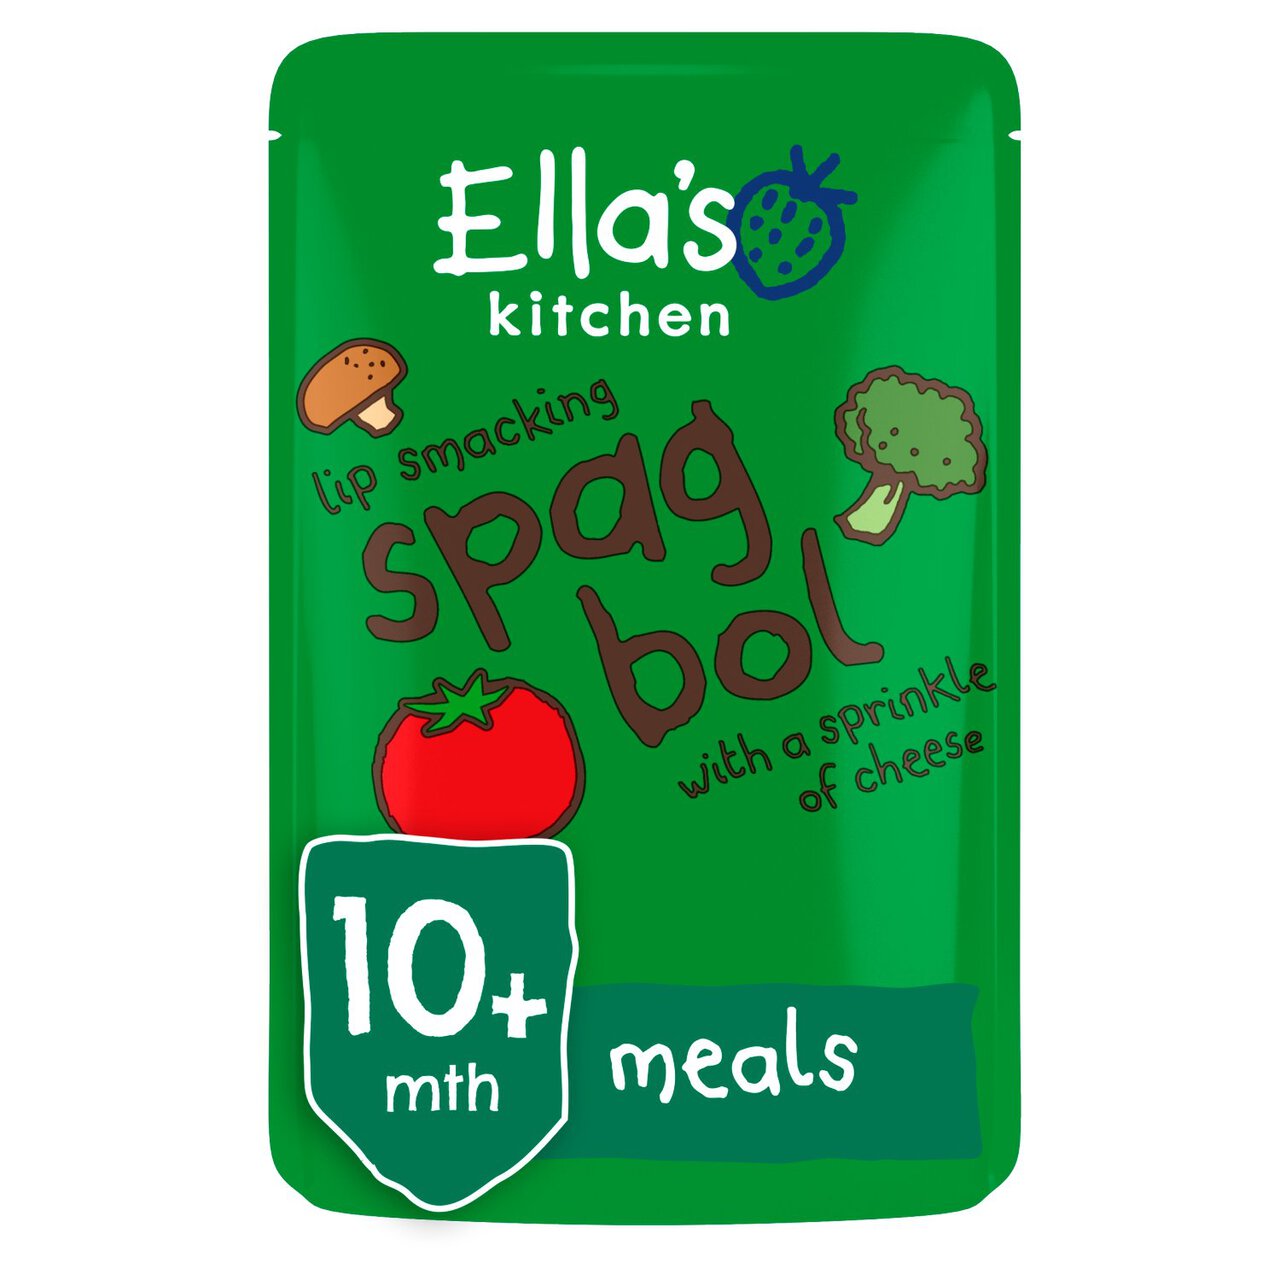 Ella's Kitchen Spag Bol with Cheese Baby Food Pouch 10+ Months 190g